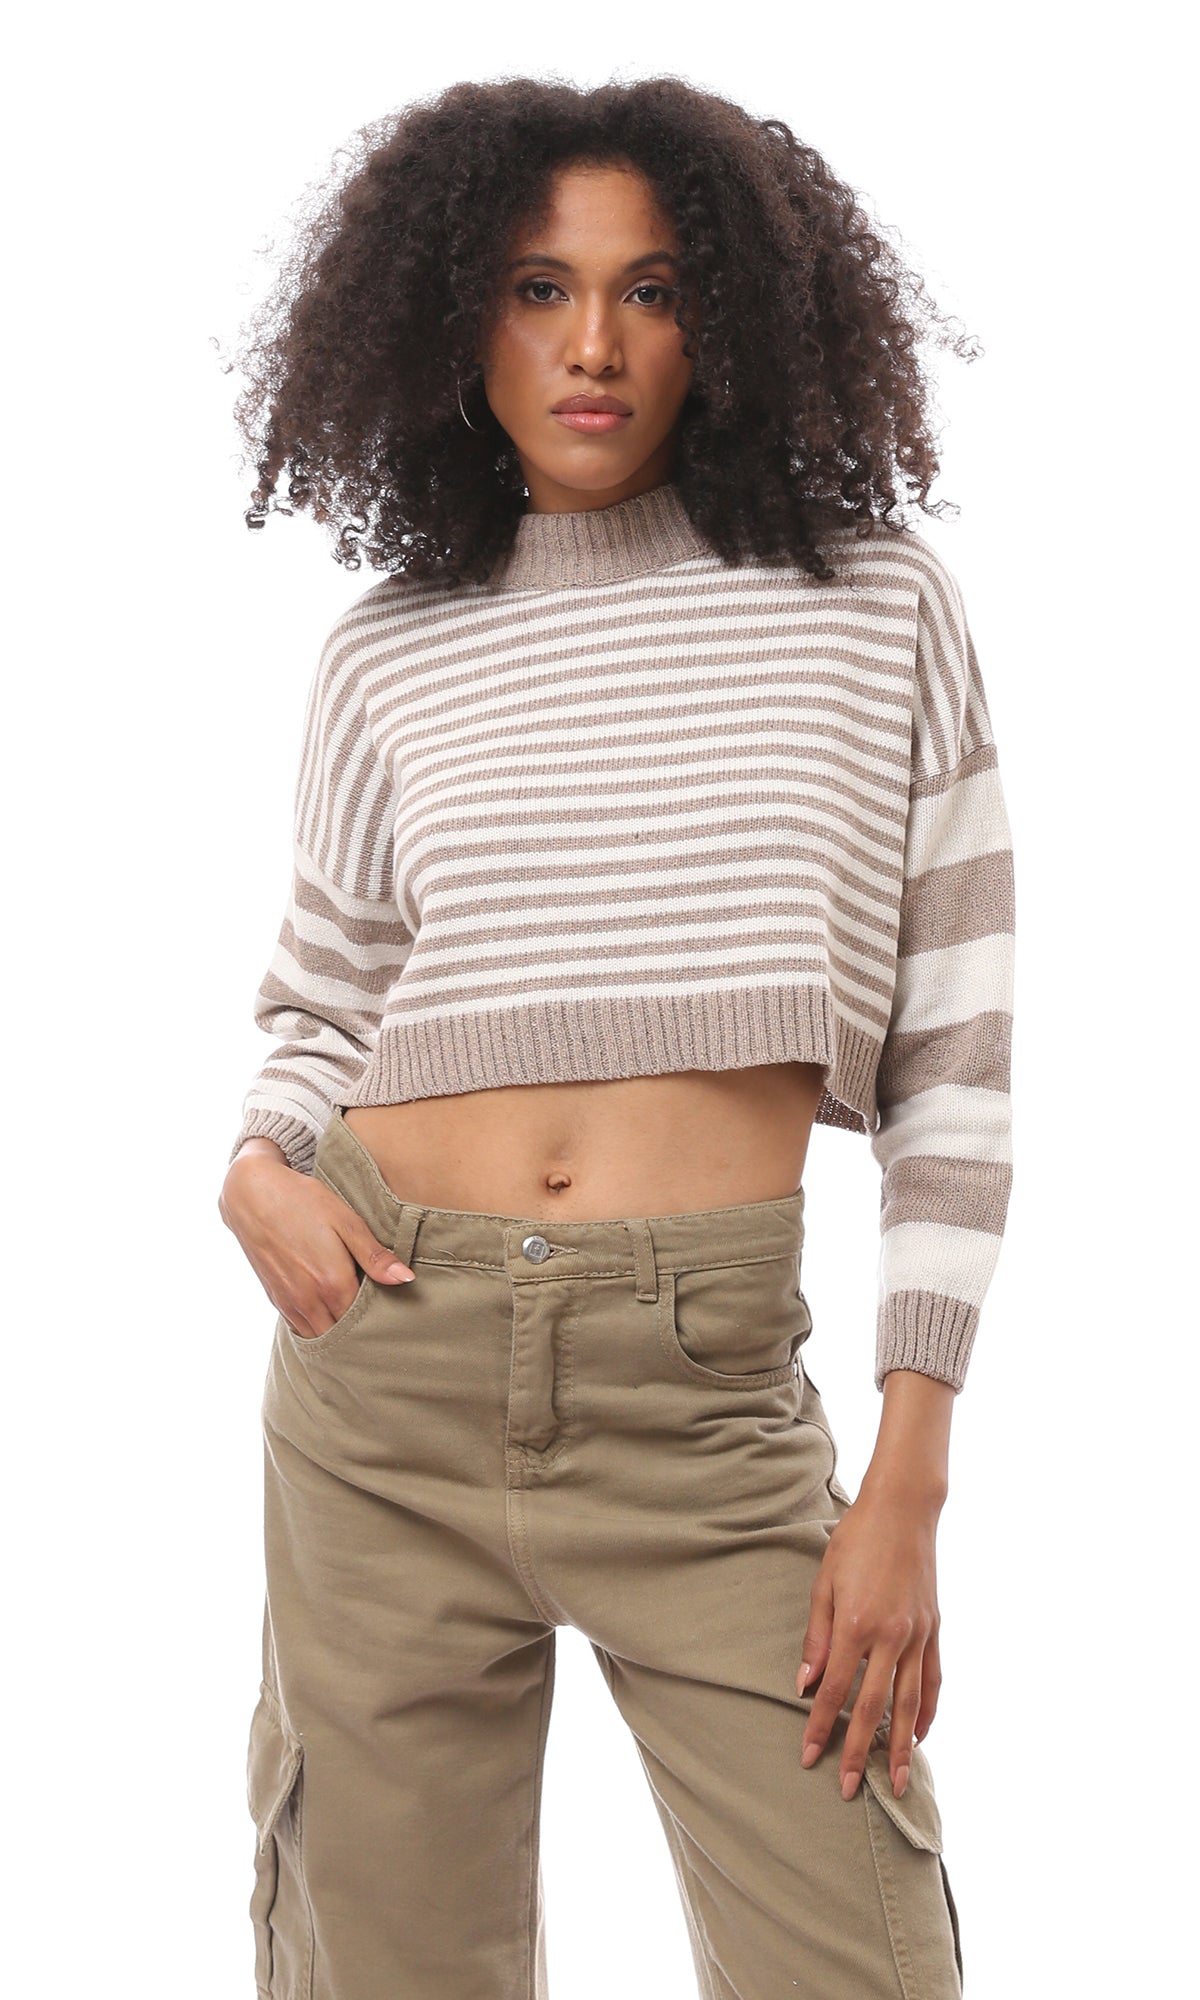 O171365 Bi-Tone Long Sleeves White & Taupe Pullover